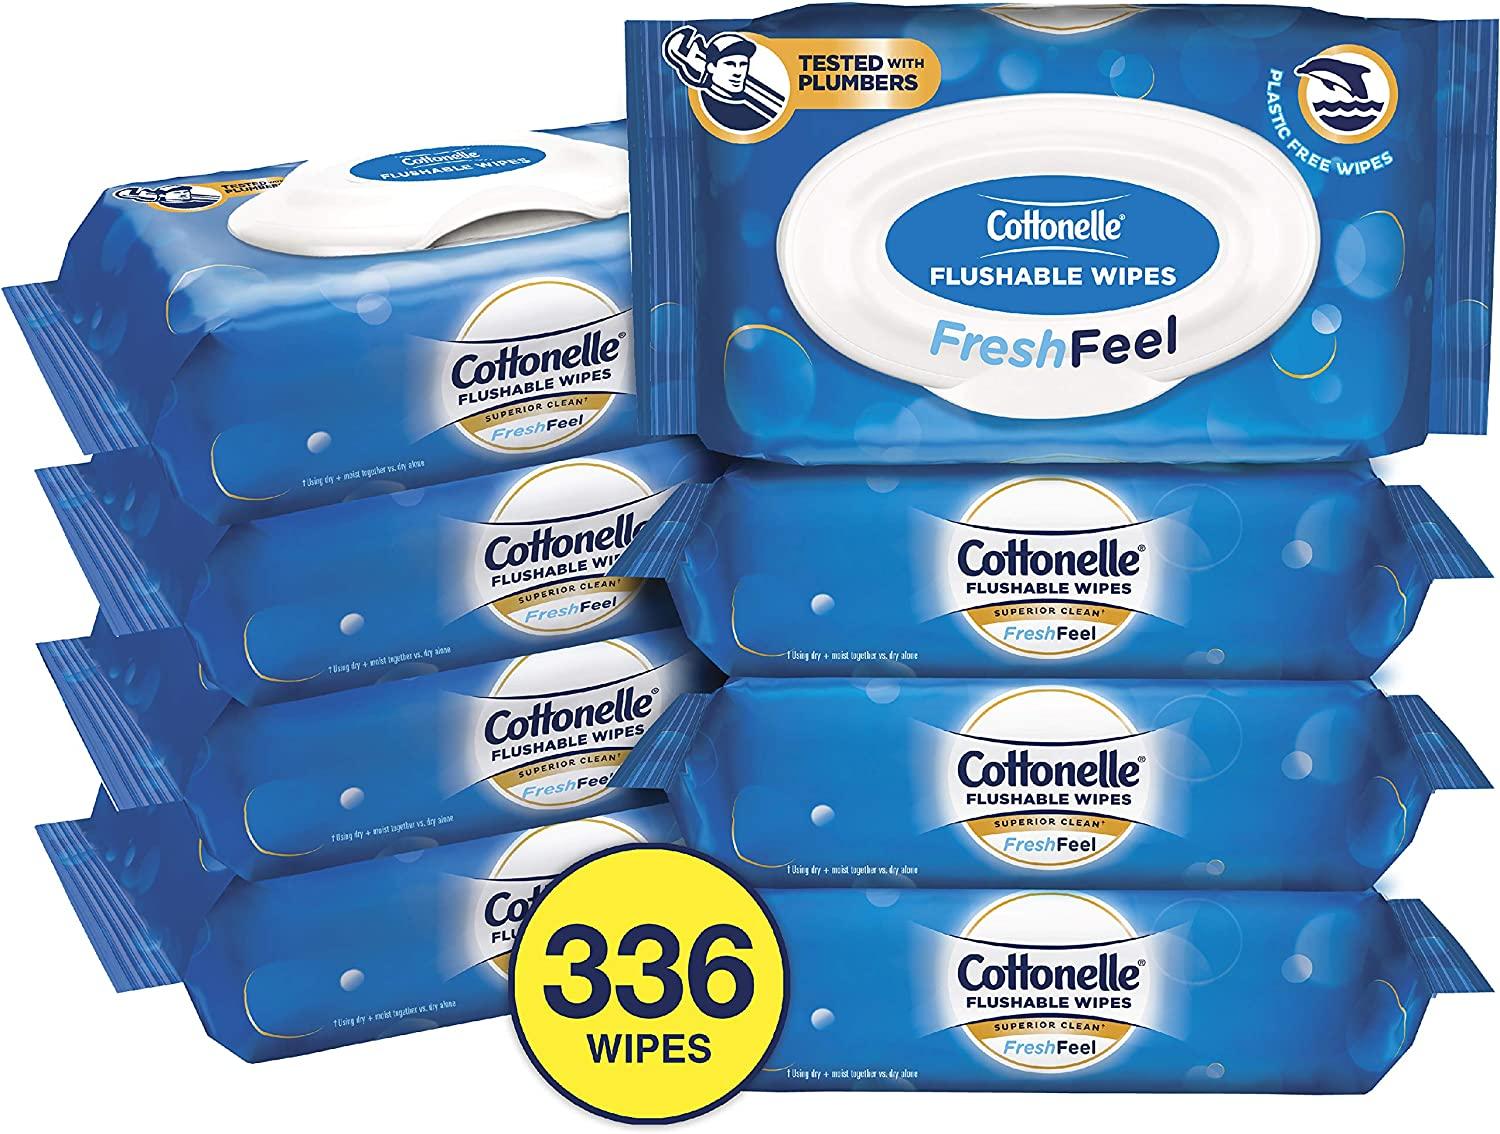 Cottonelle FreshFeel Flushable Wet Wipes for Adults, 8 Flip-Top Packs, 42 Wipes per Pack (336 Wipes Total), $15 @amazon.com